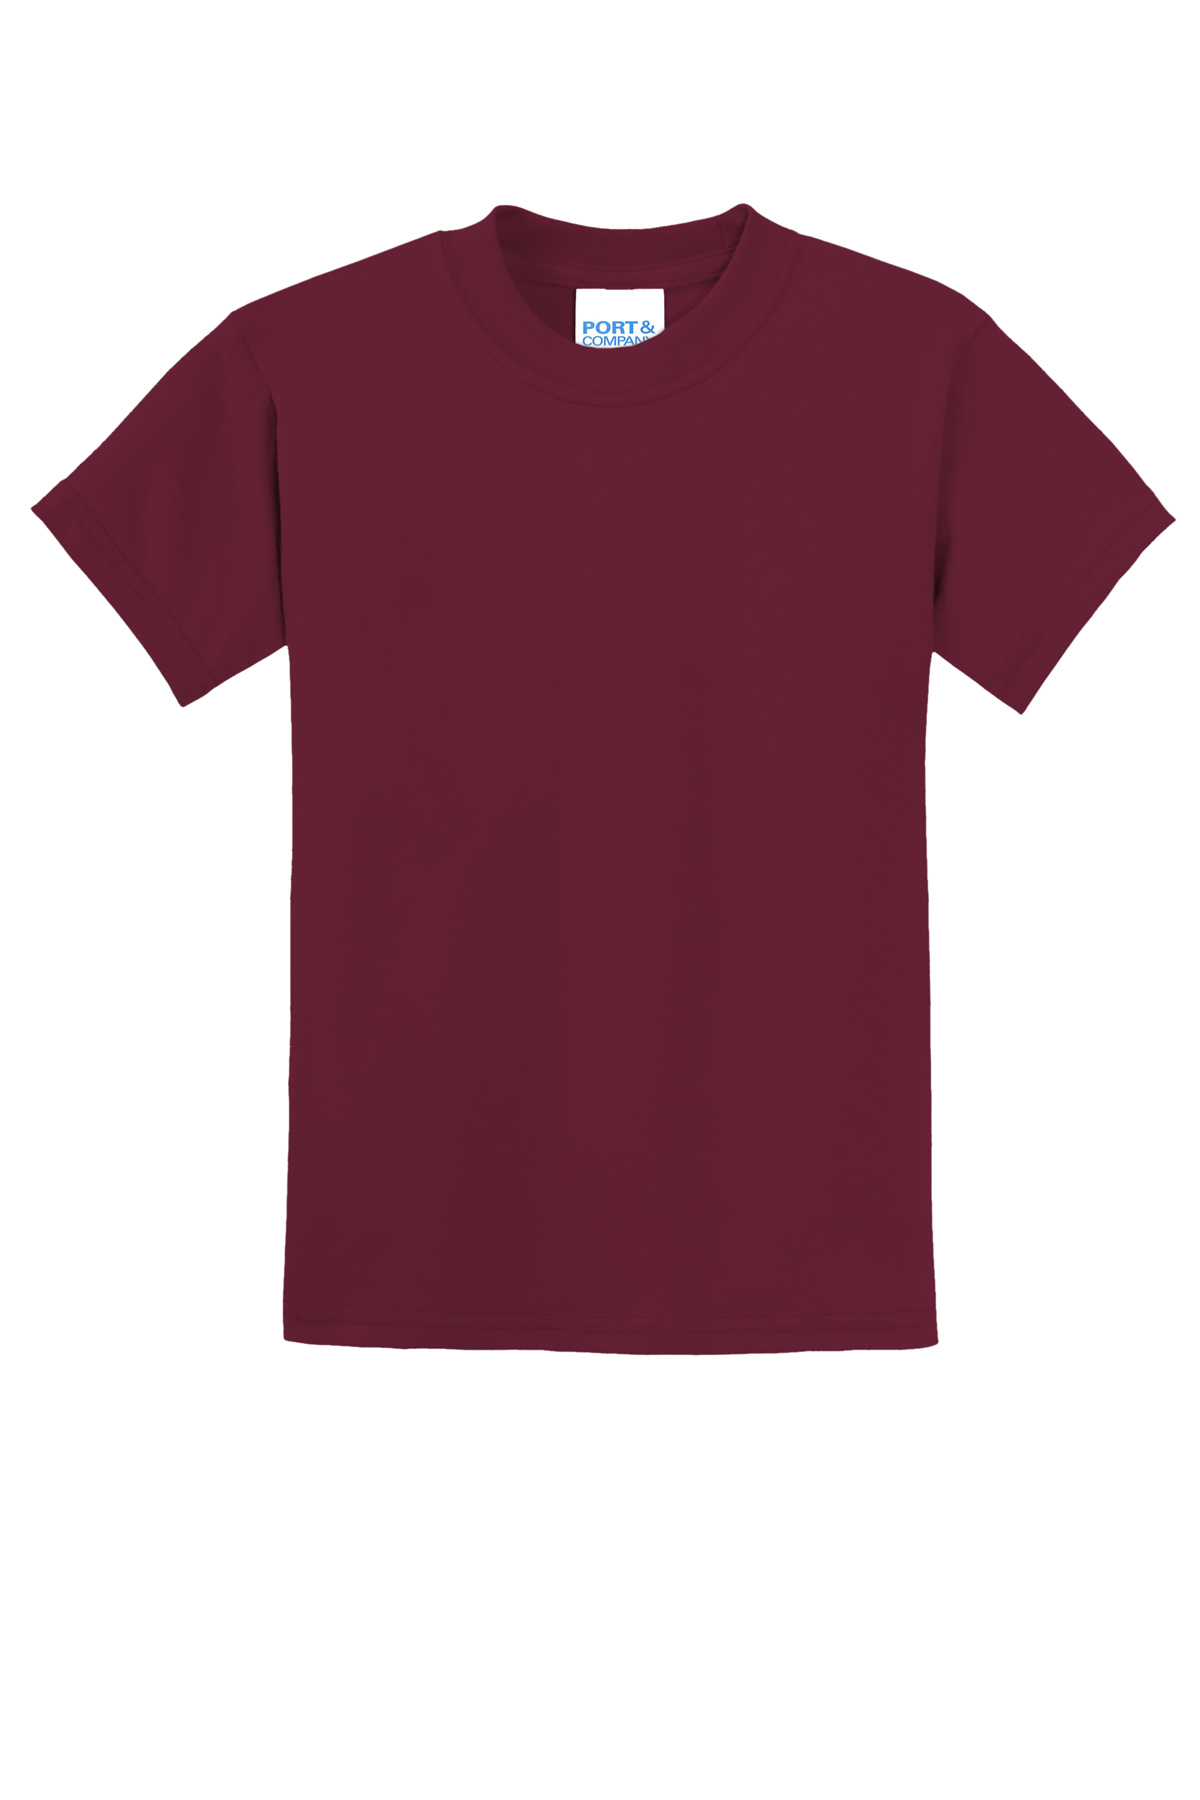 Port & Company Youth Core Blend Tee | Product | SanMar